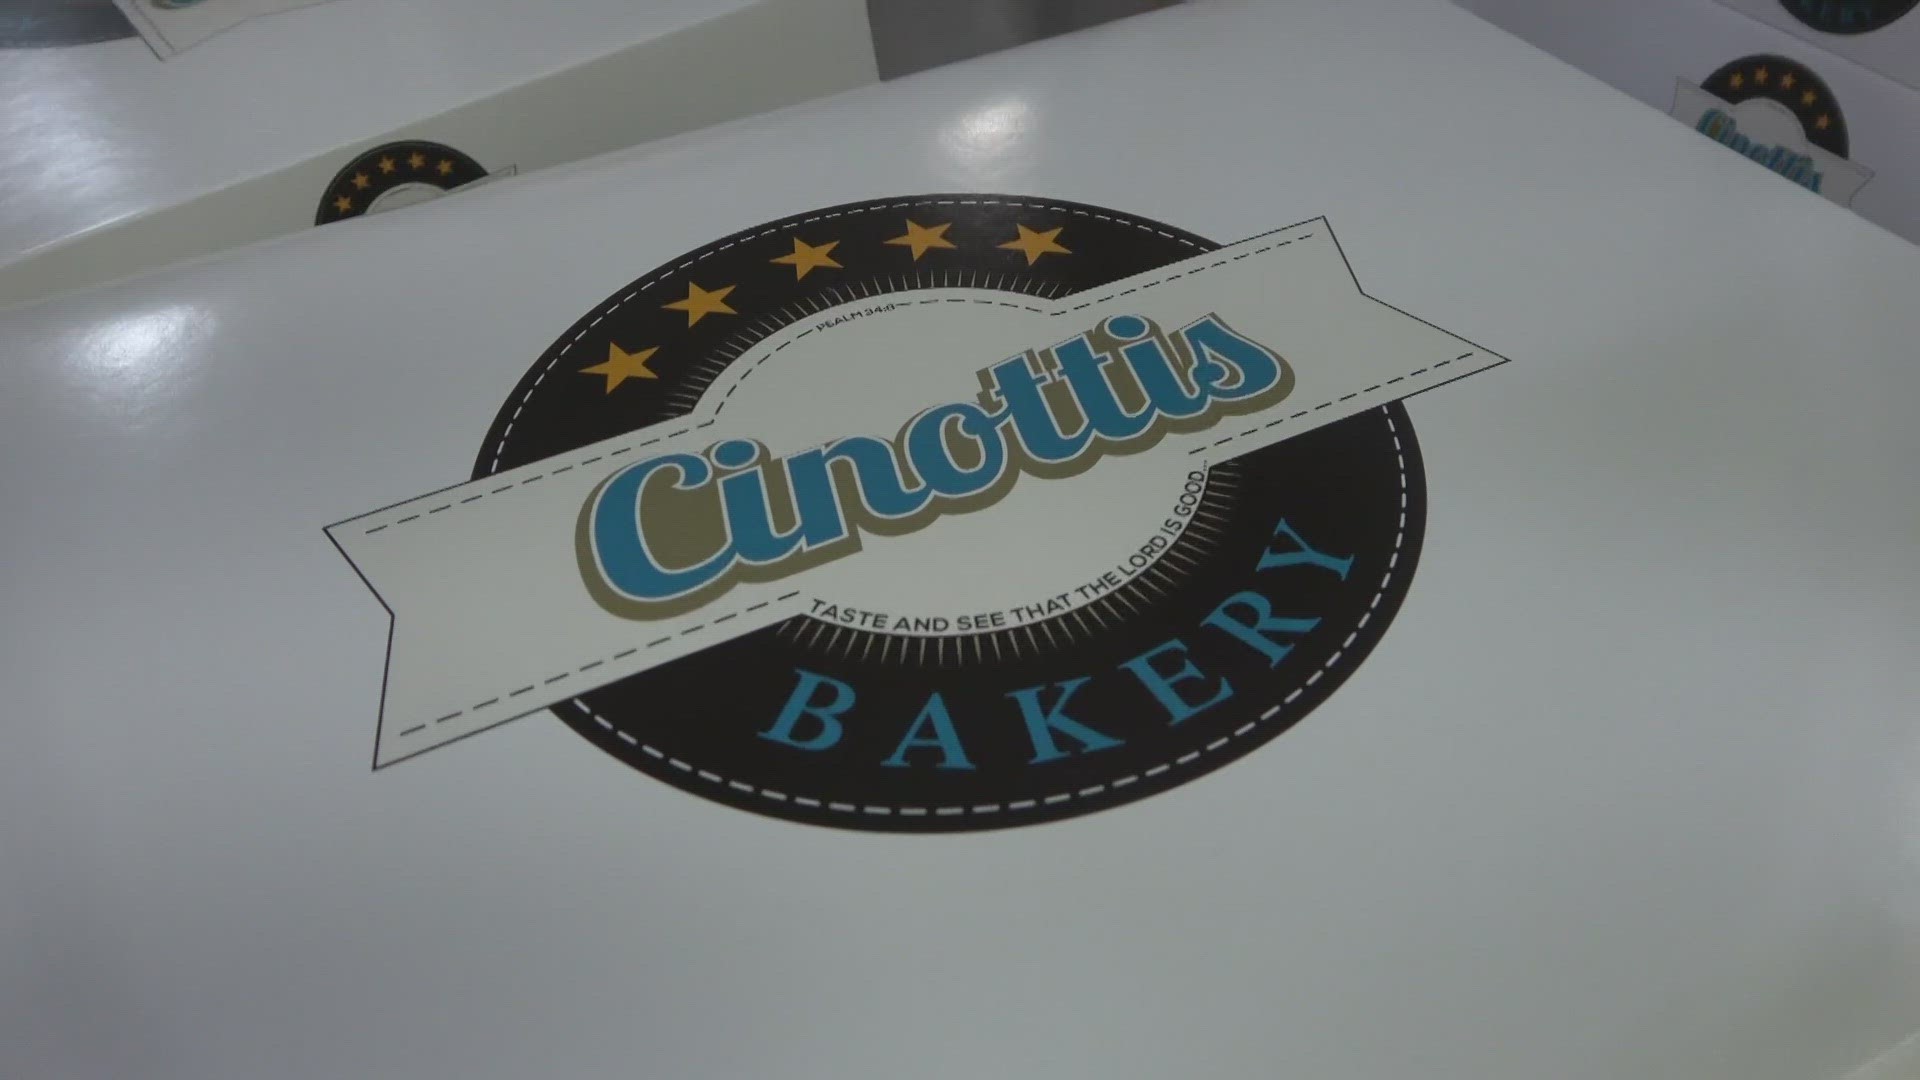 The sweet treat with the hole in the middle attracts long lines of customers at Cinotti's. But the local bakery is doing something even more special this October.